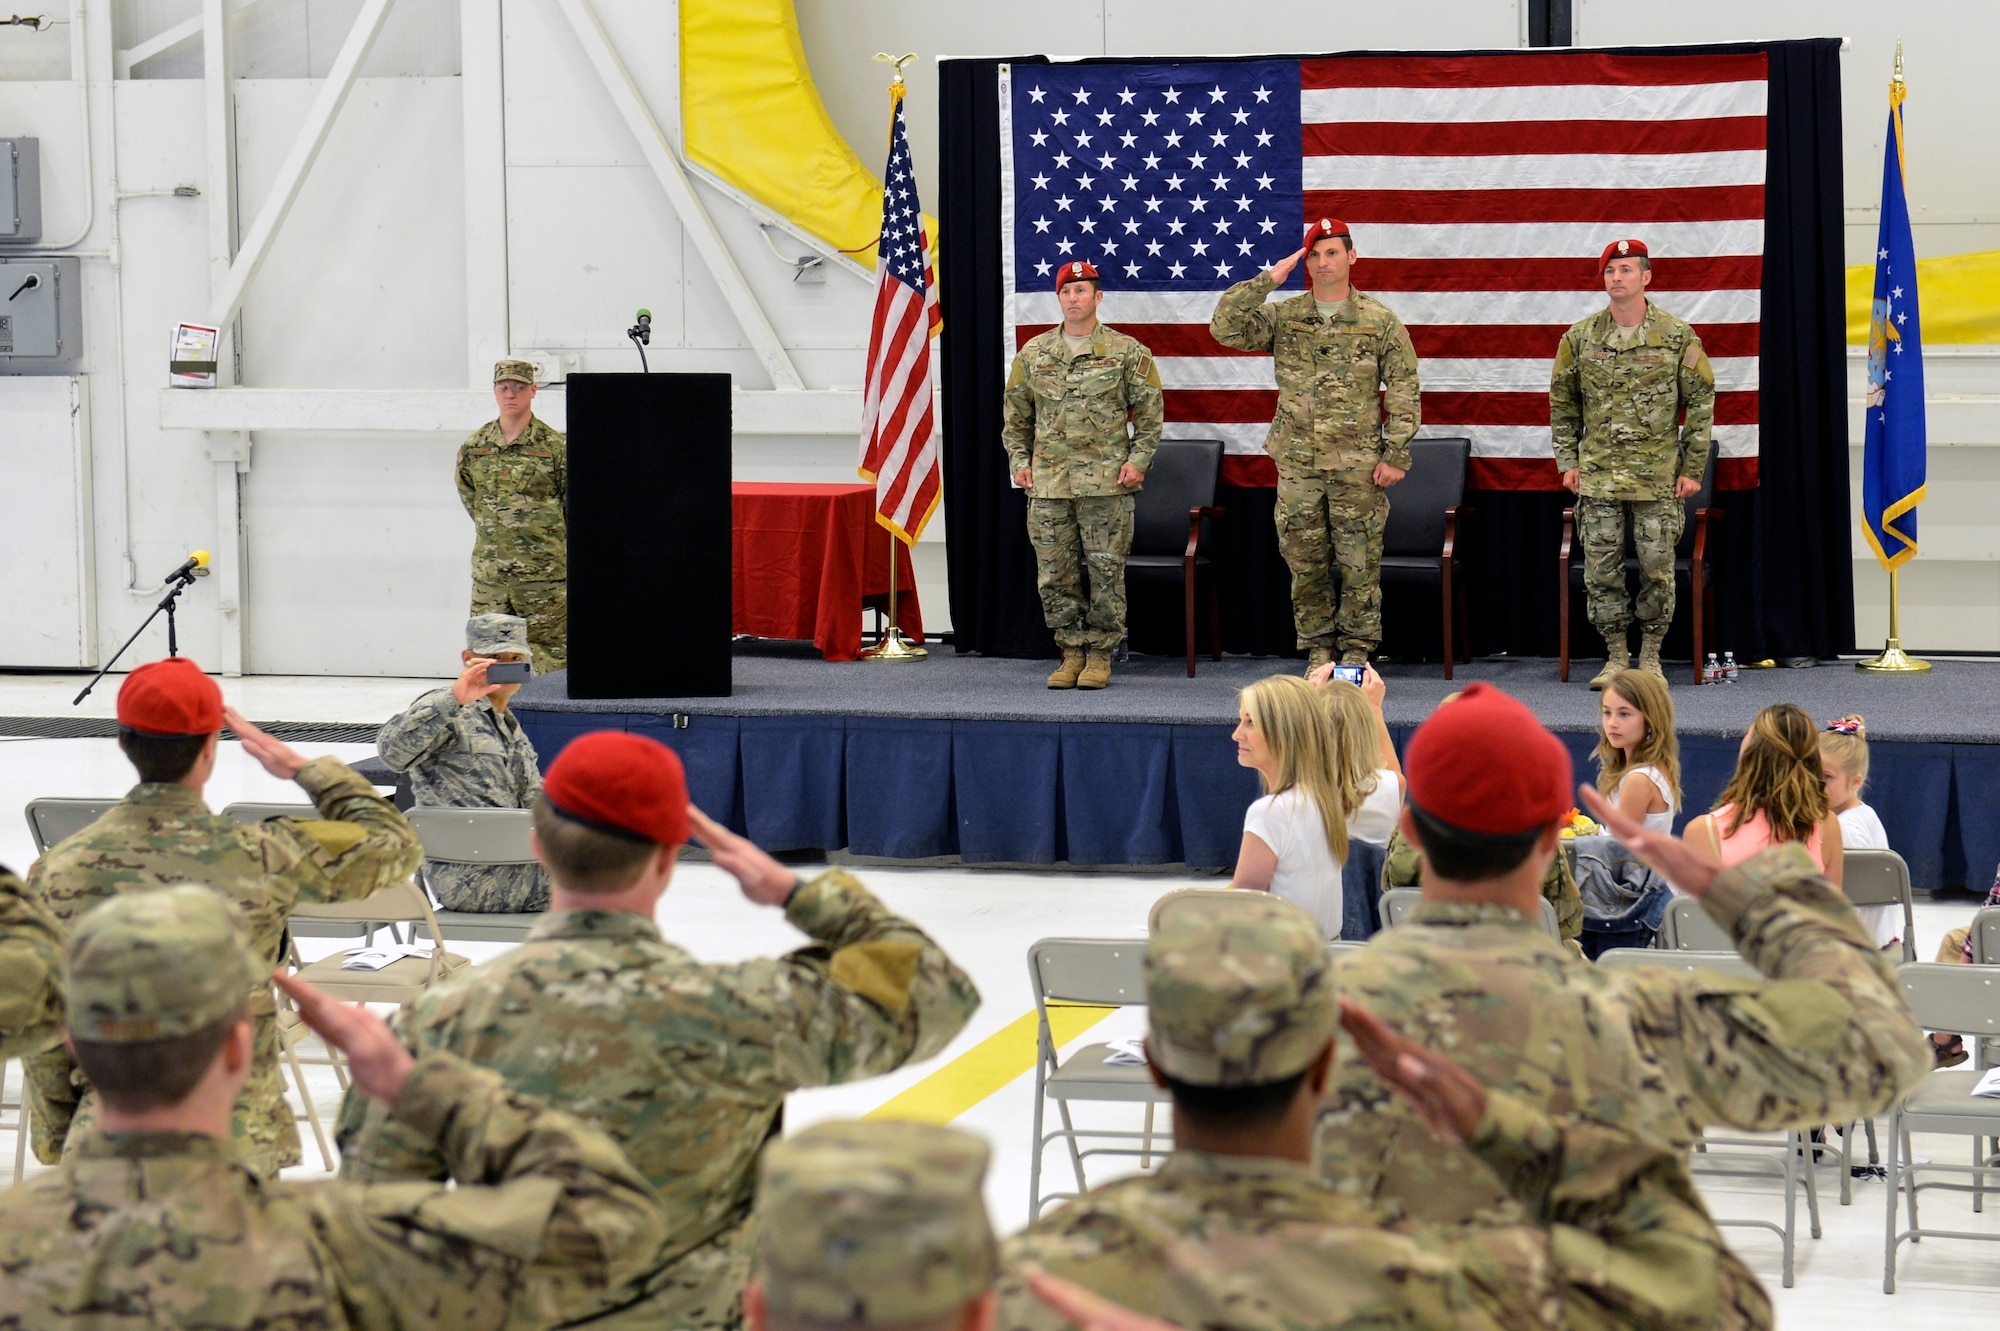 The men and women of the 22nd Special Tactics Squadron render their first salute to Lt. Col. Michael Evancic, incoming 22nd STS commander, during the change of command ceremony, June 3, 2014, at Joint Base Lewis-McChord, Wash. Evancic took command of the 22nd STS from Col. Thad Allen. (U.S. Air Force photo/Staff Sgt. Russ Jackson)